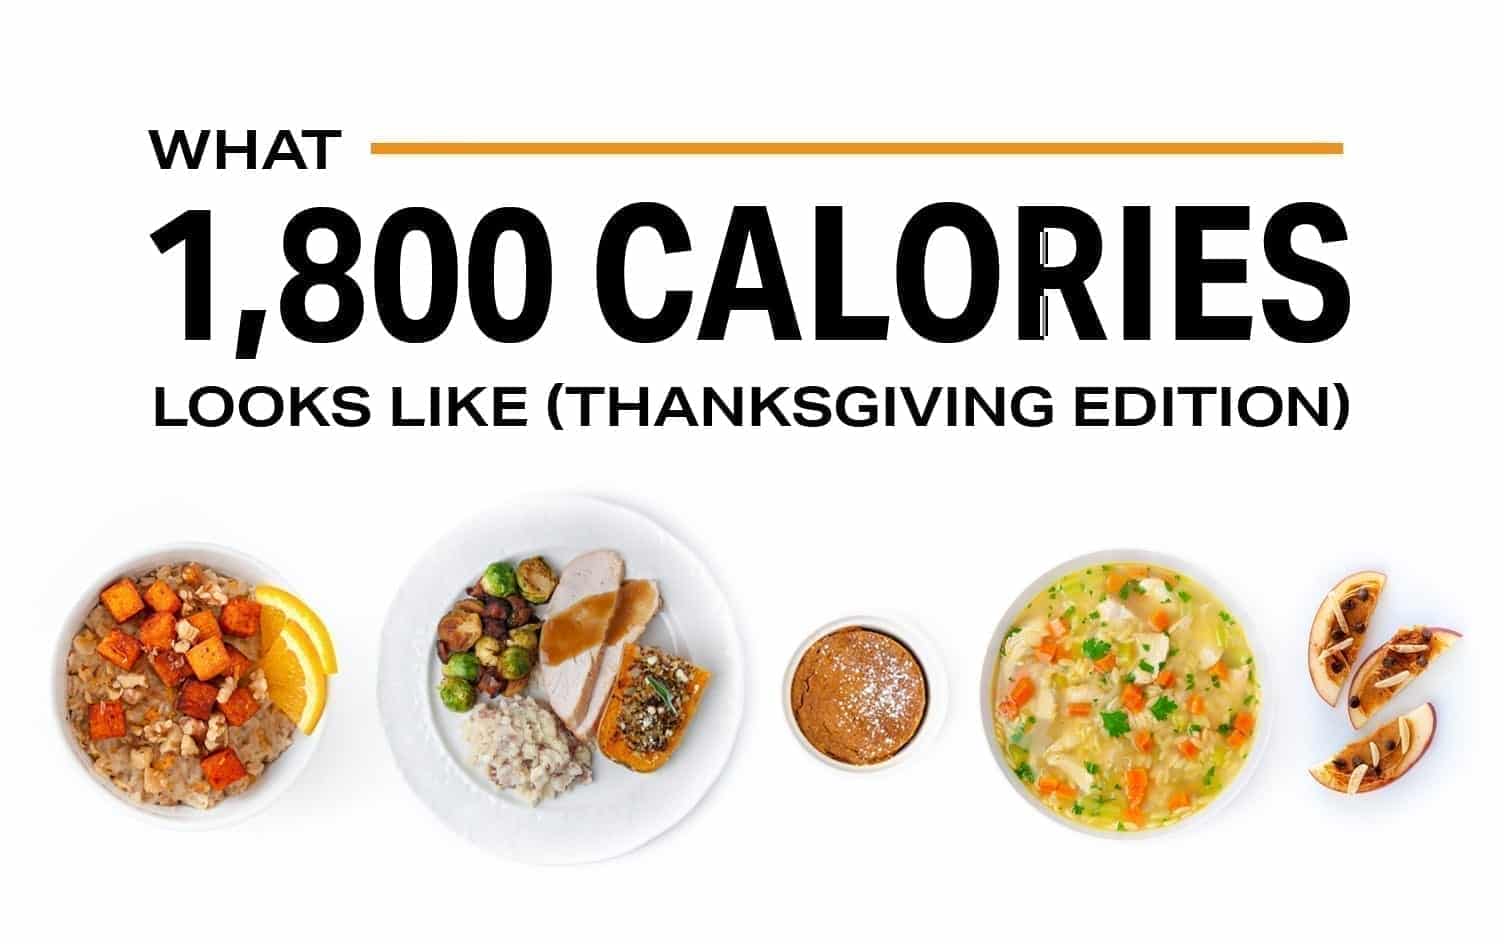 What 1,800 Calories Looks Like on Thanksgiving Day